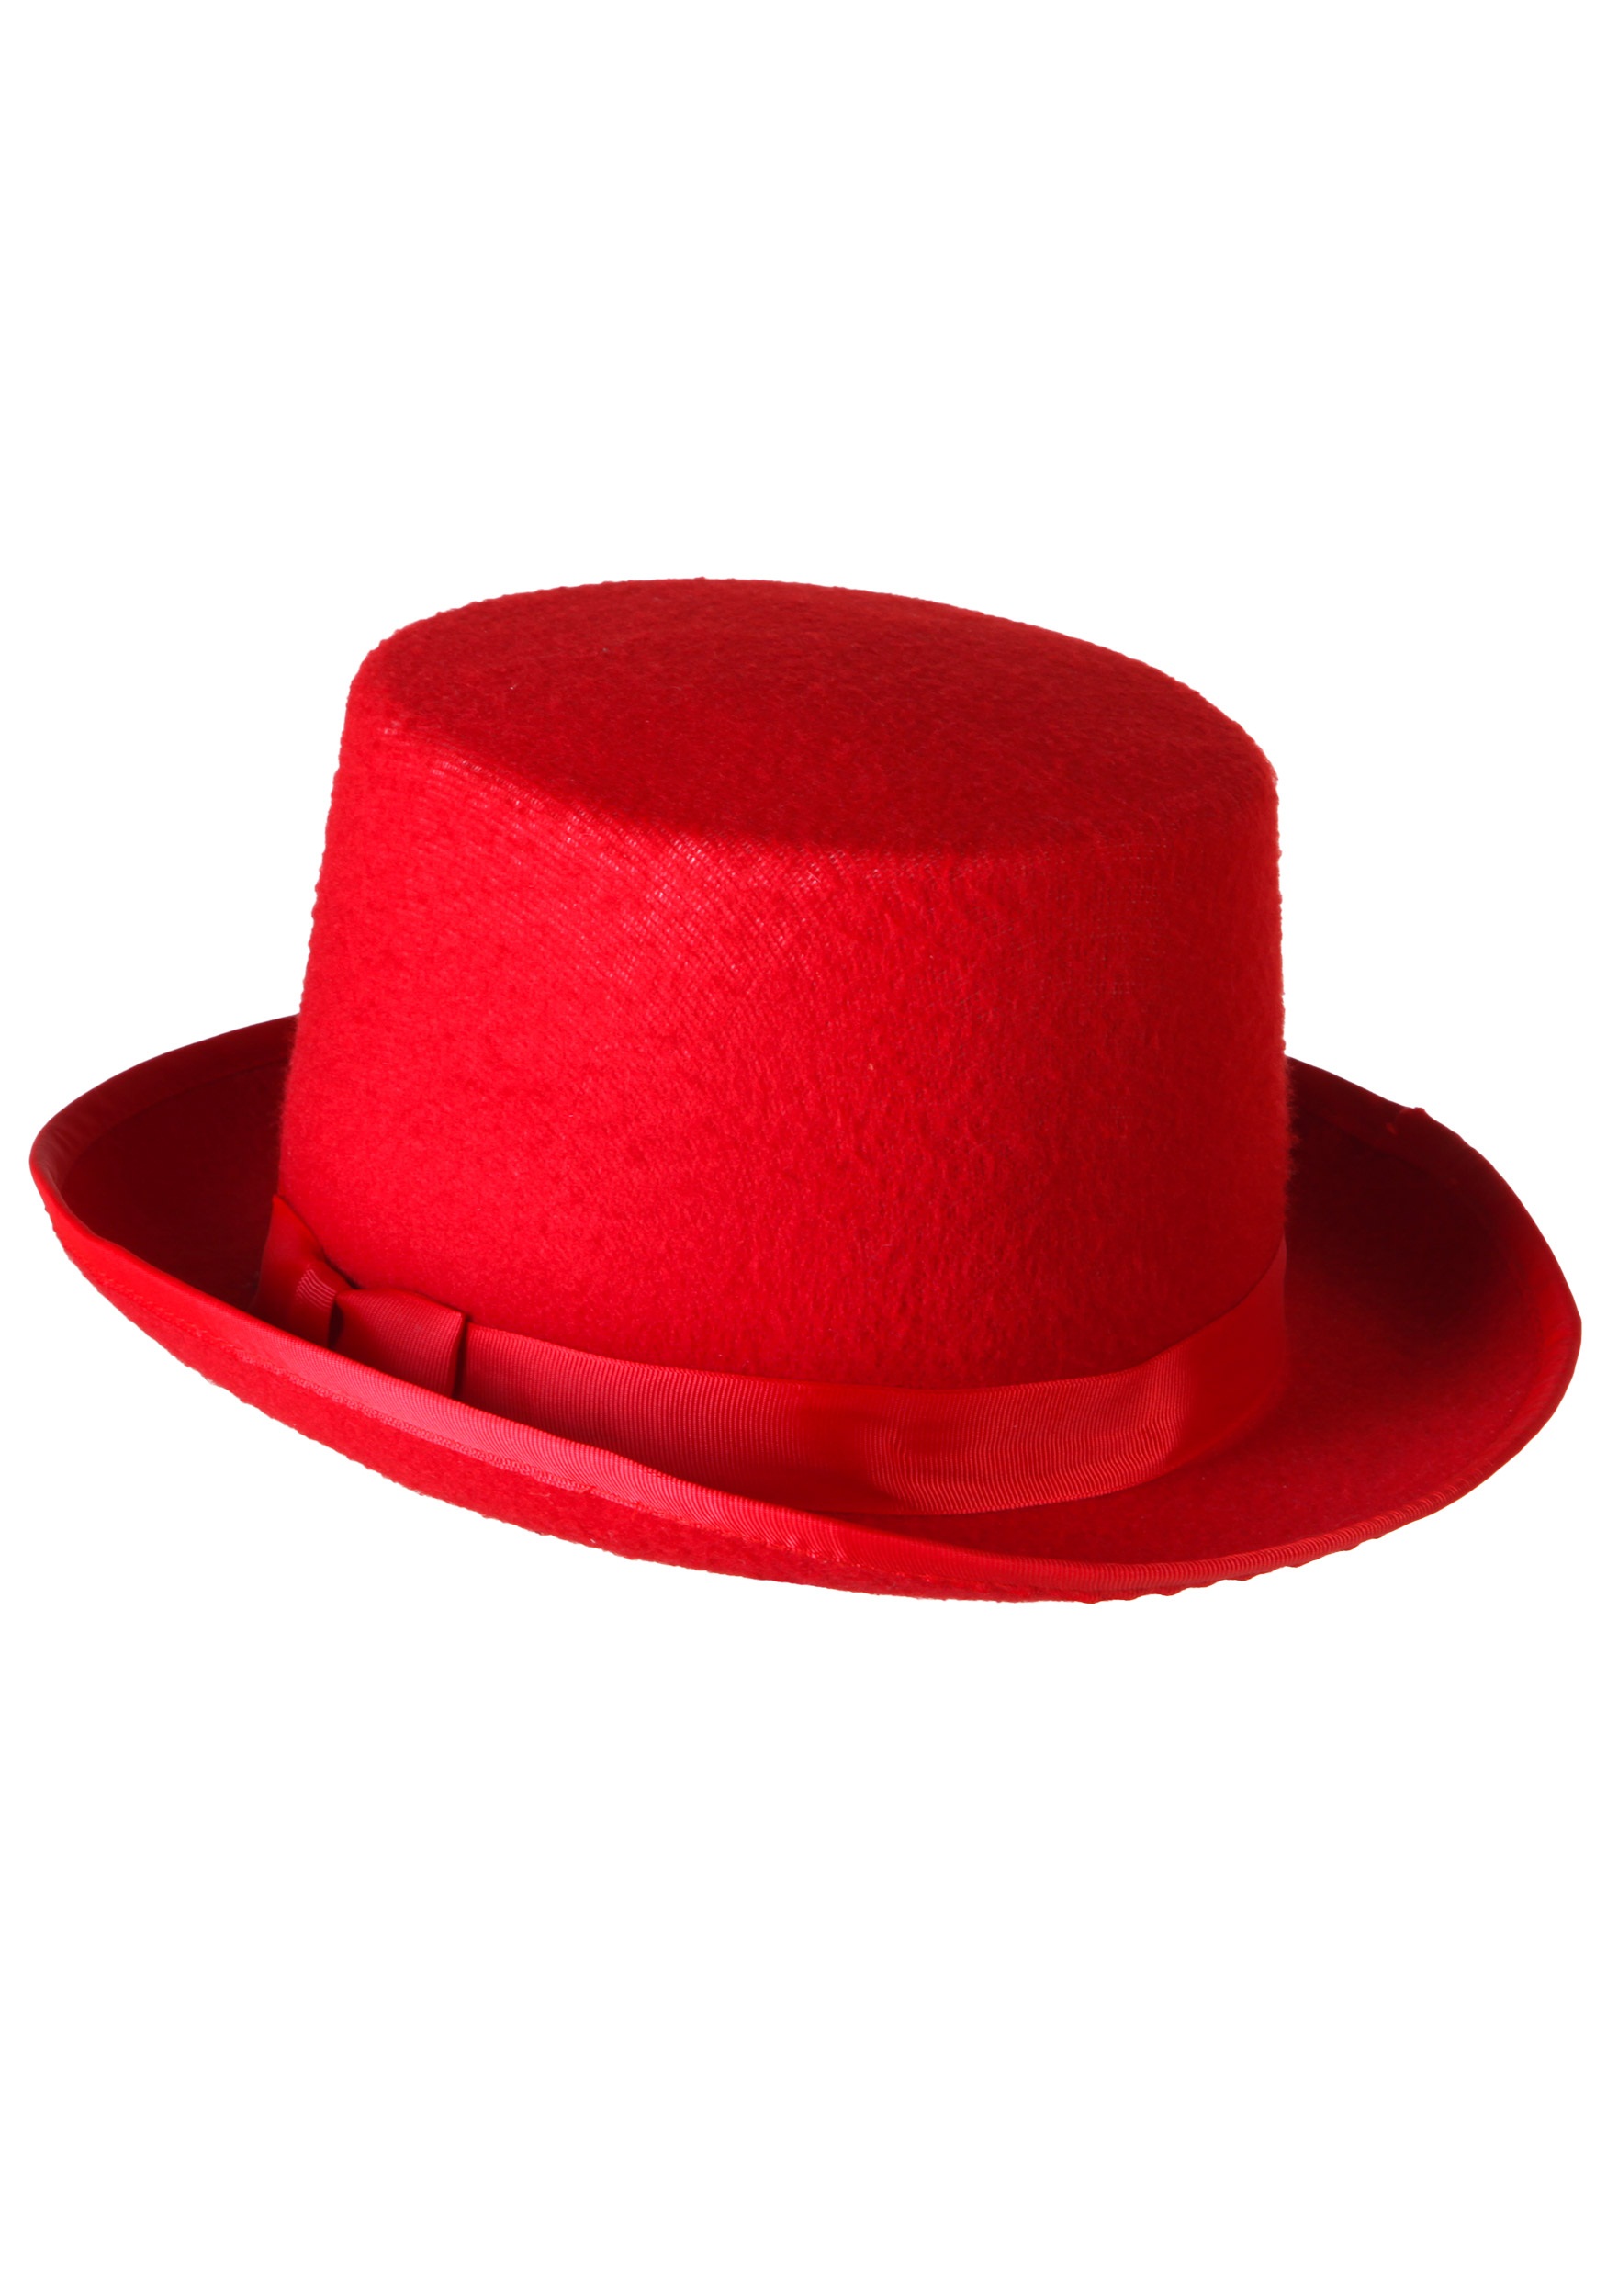 red hat clip art download - photo #32